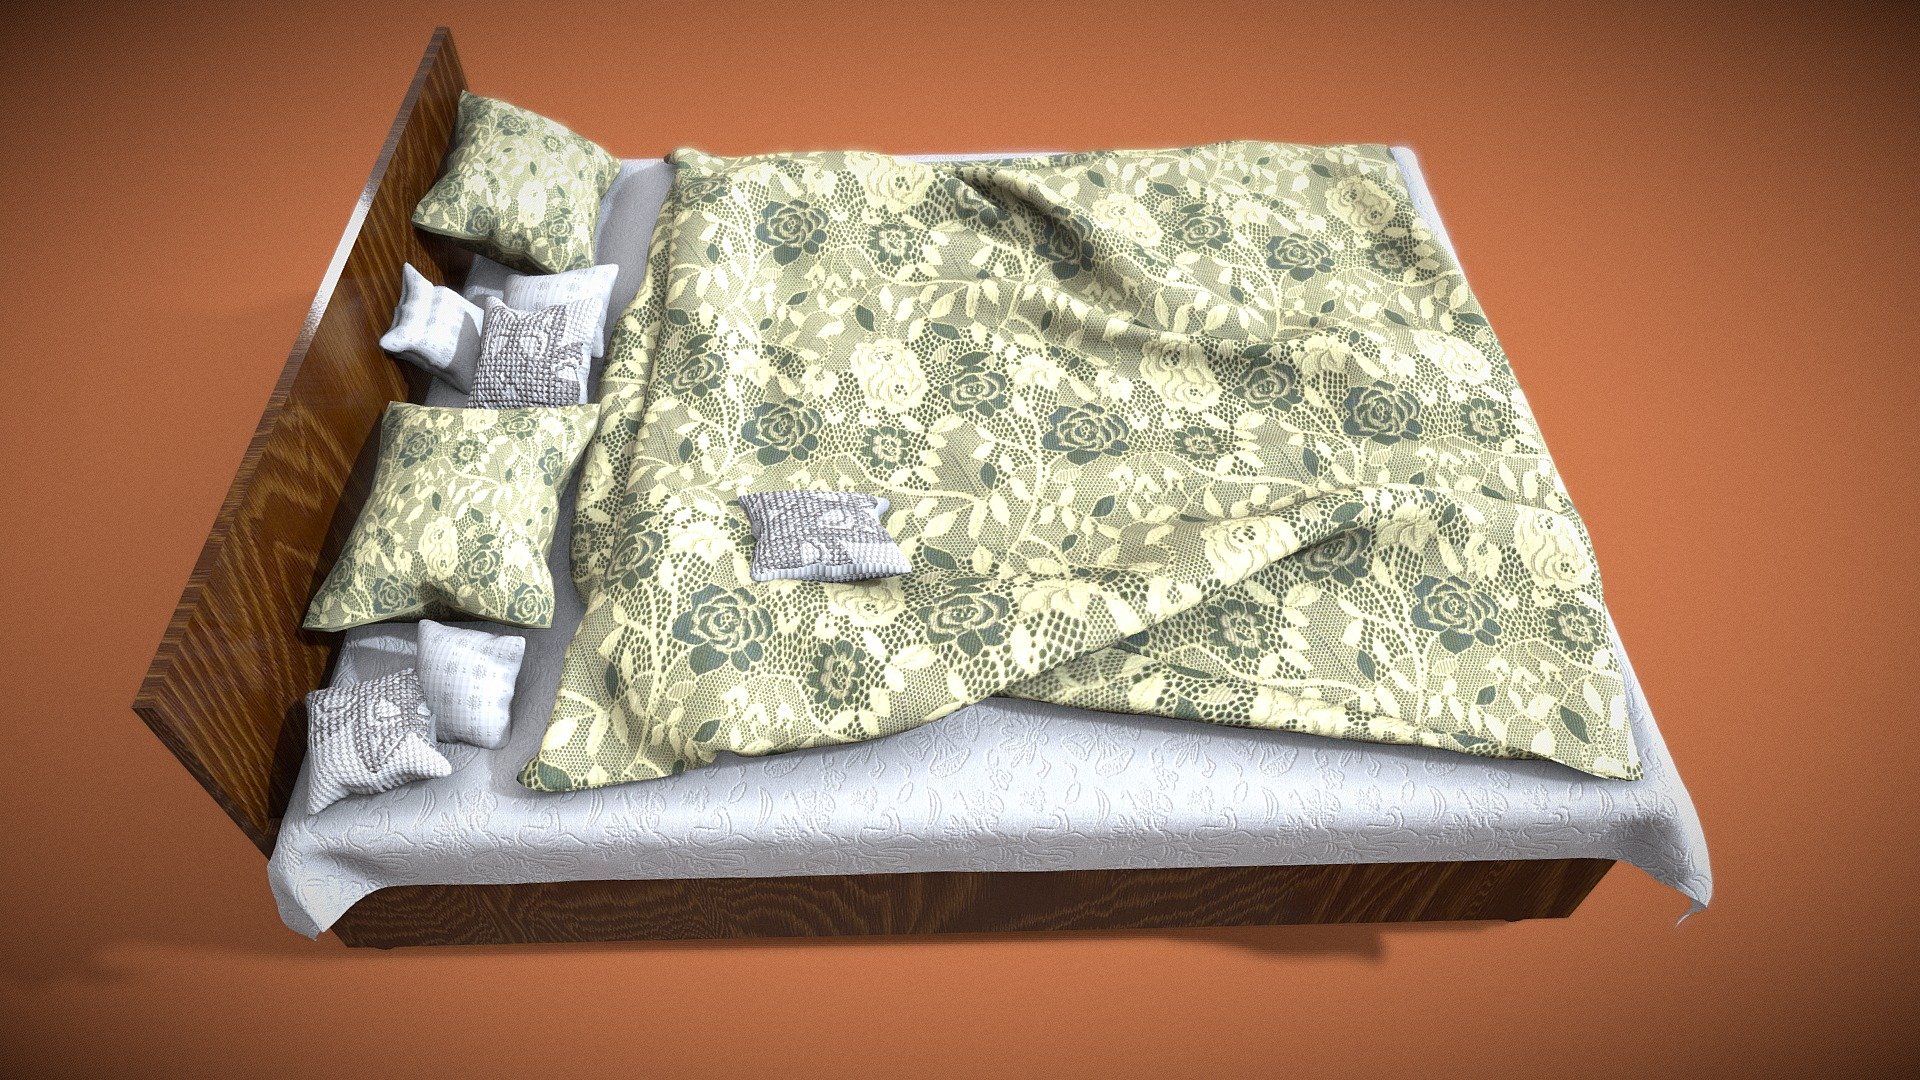 This is a king size bed for bedroom with two big pillows and five small, a bedsheet, and quilt.
This asset was modelled in maya and textured in Substance painter.
To see more Work please visit my instagram profile : https://www.instagram.com/art.rajat/?hl=en
Stay tuned for more exciting upcoming models ... 3d model